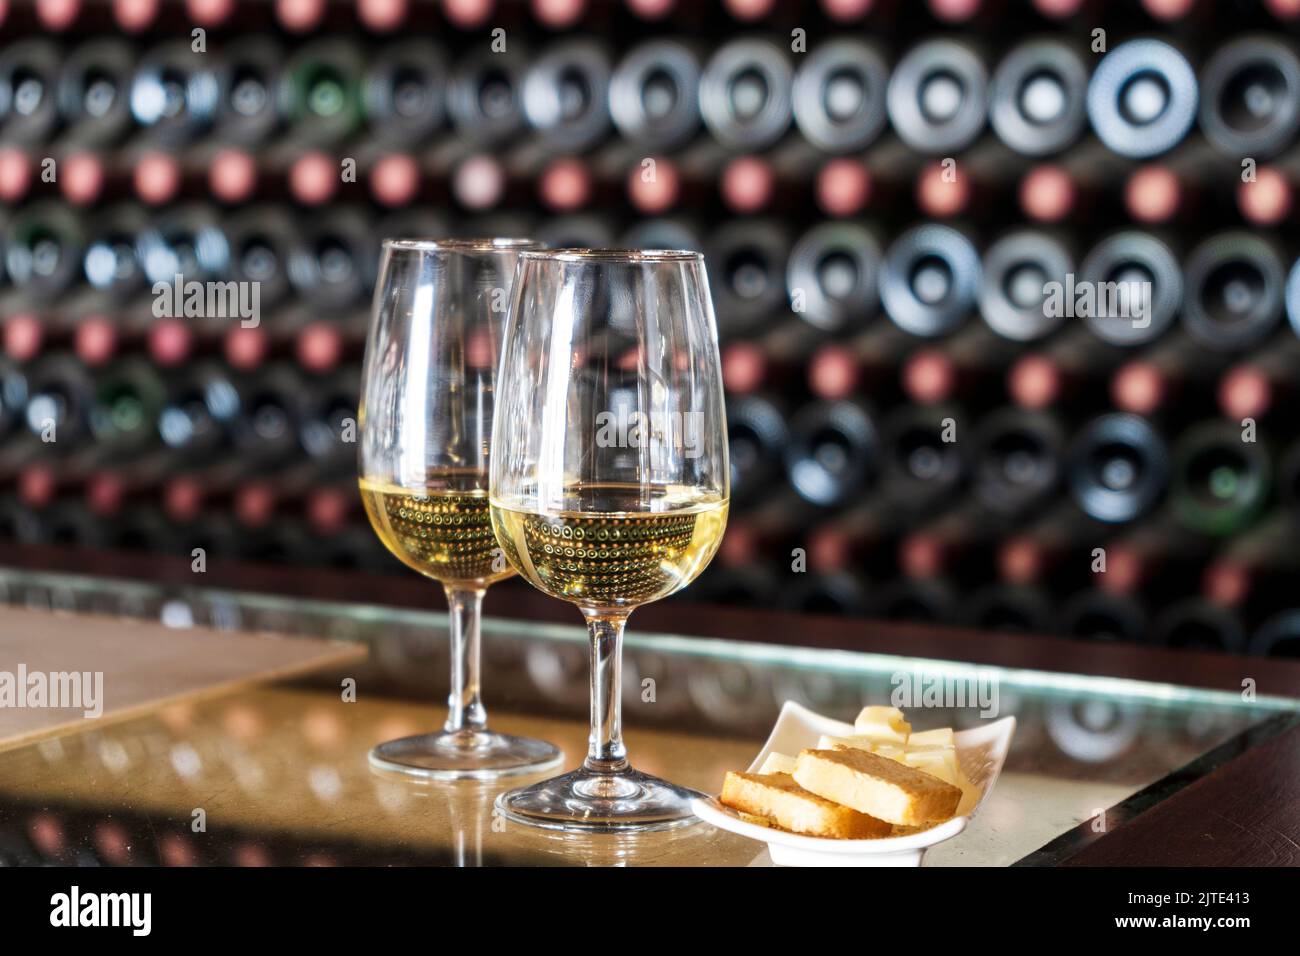 Wine tasting in the winery - 2 glasses of white wine with toasts and cheese with hundreds of wine bottles stacked behind, Lanzarote, Spain Stock Photo